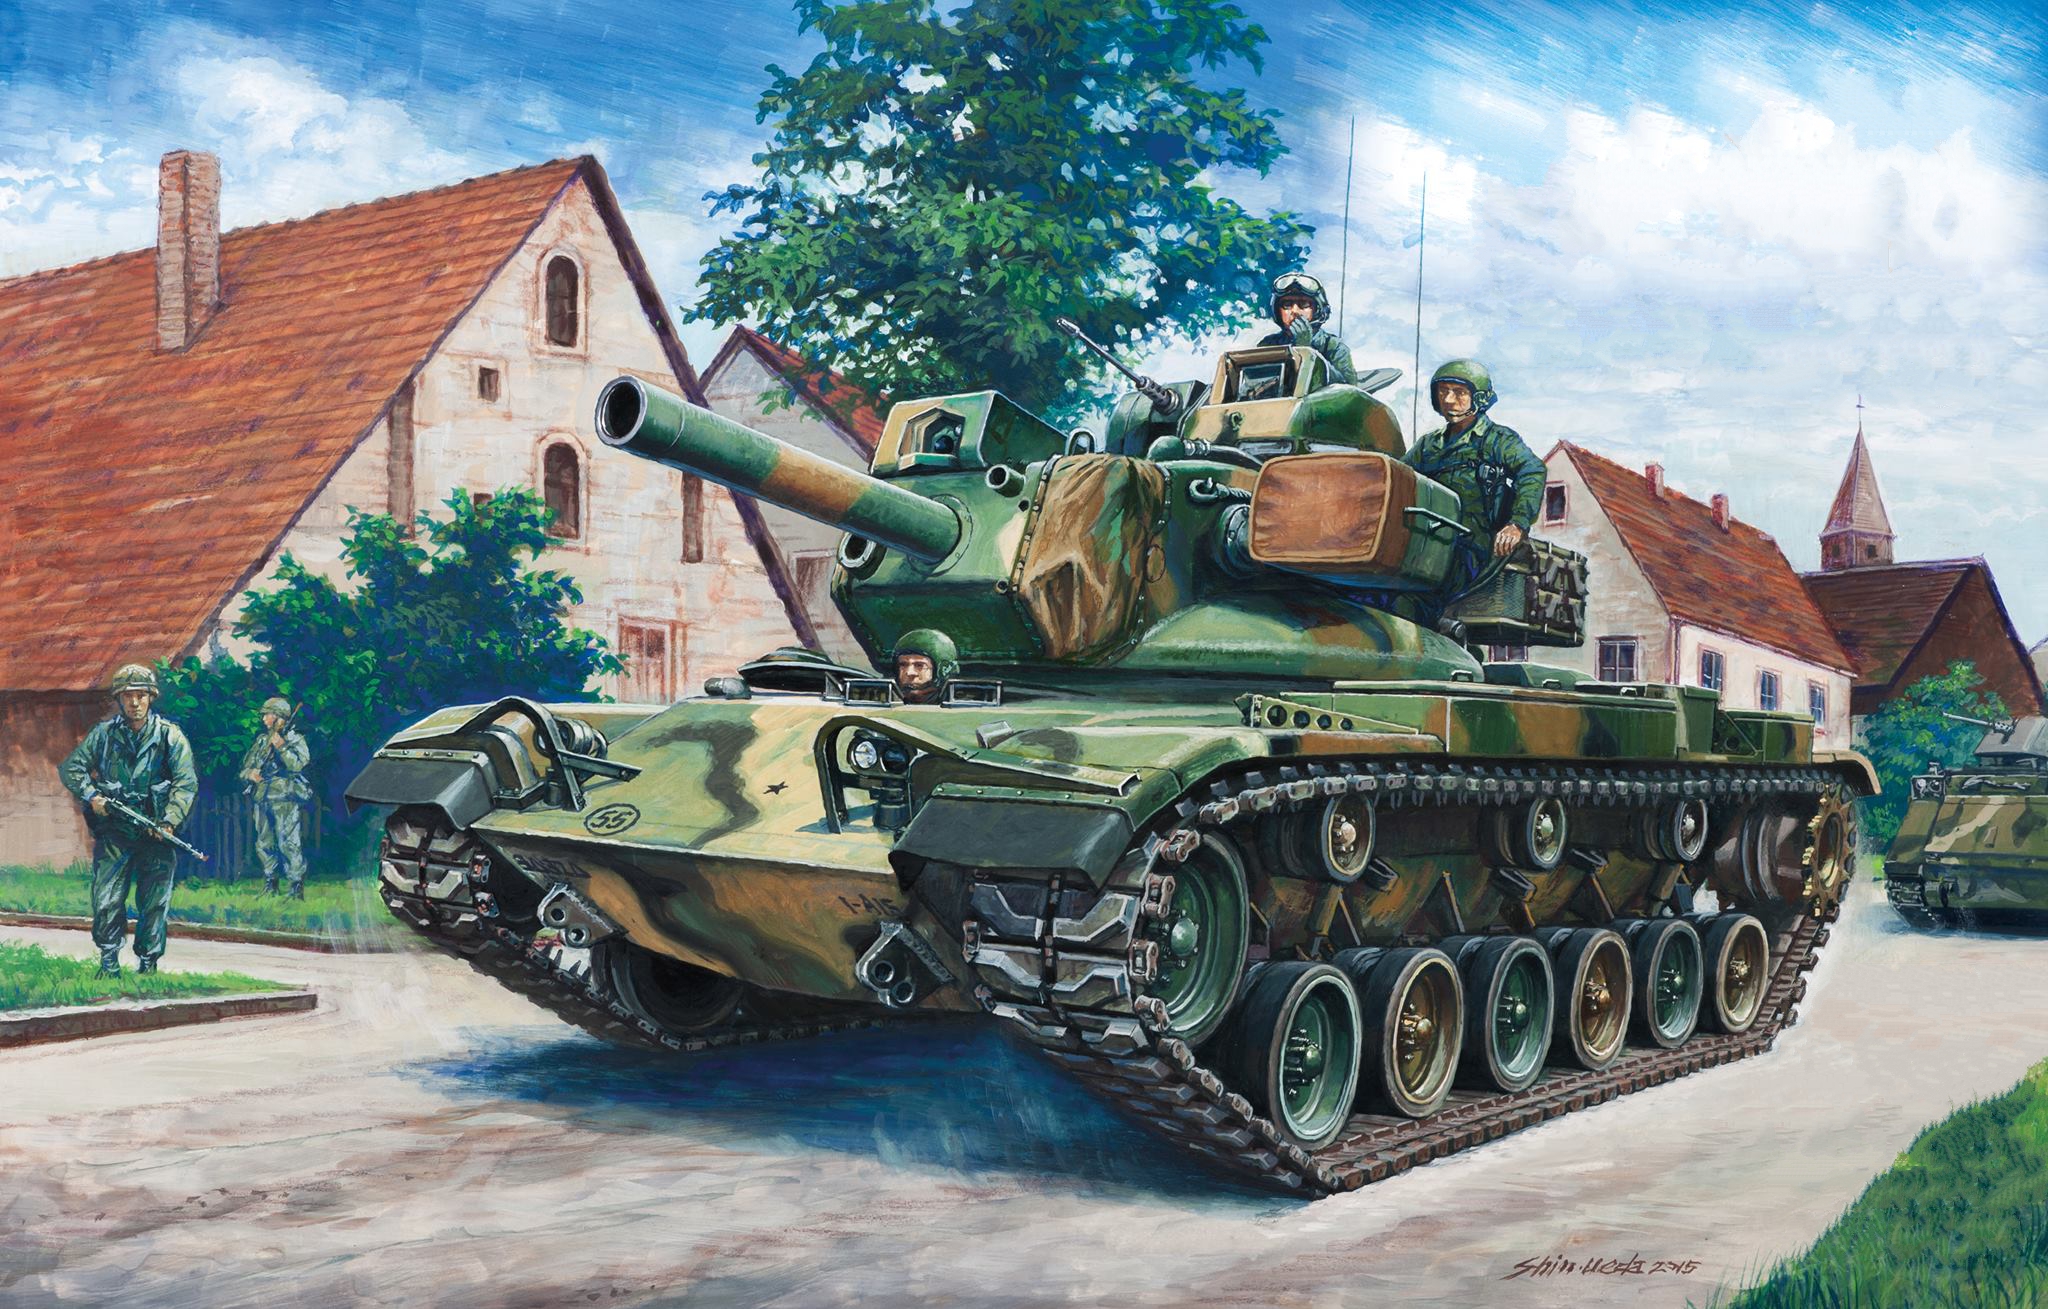 General 2048x1309 building tank trees soldier military American tanks